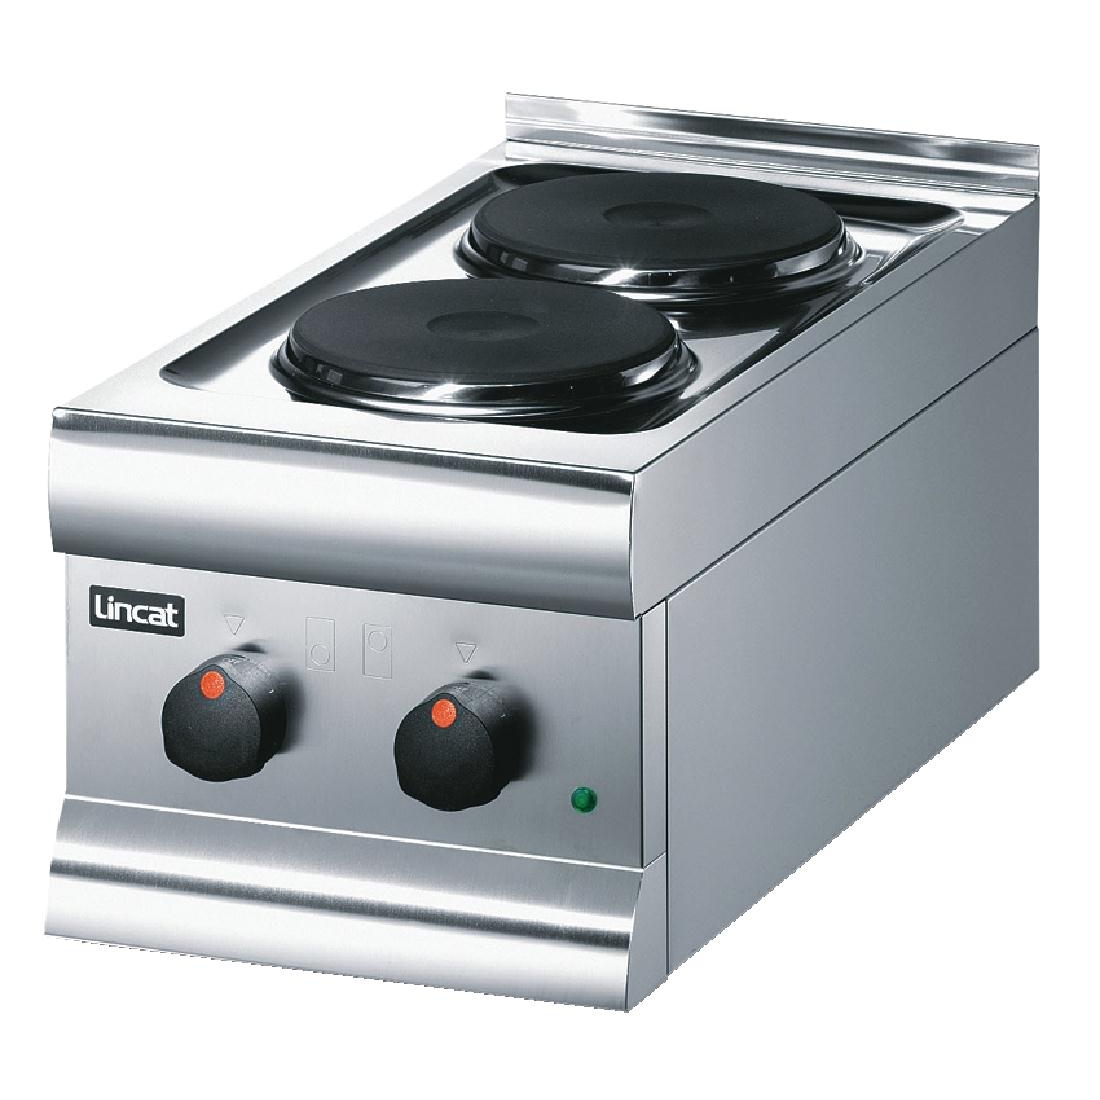 Lincat Silverlink 600 Electric Boiling Ring HT3R